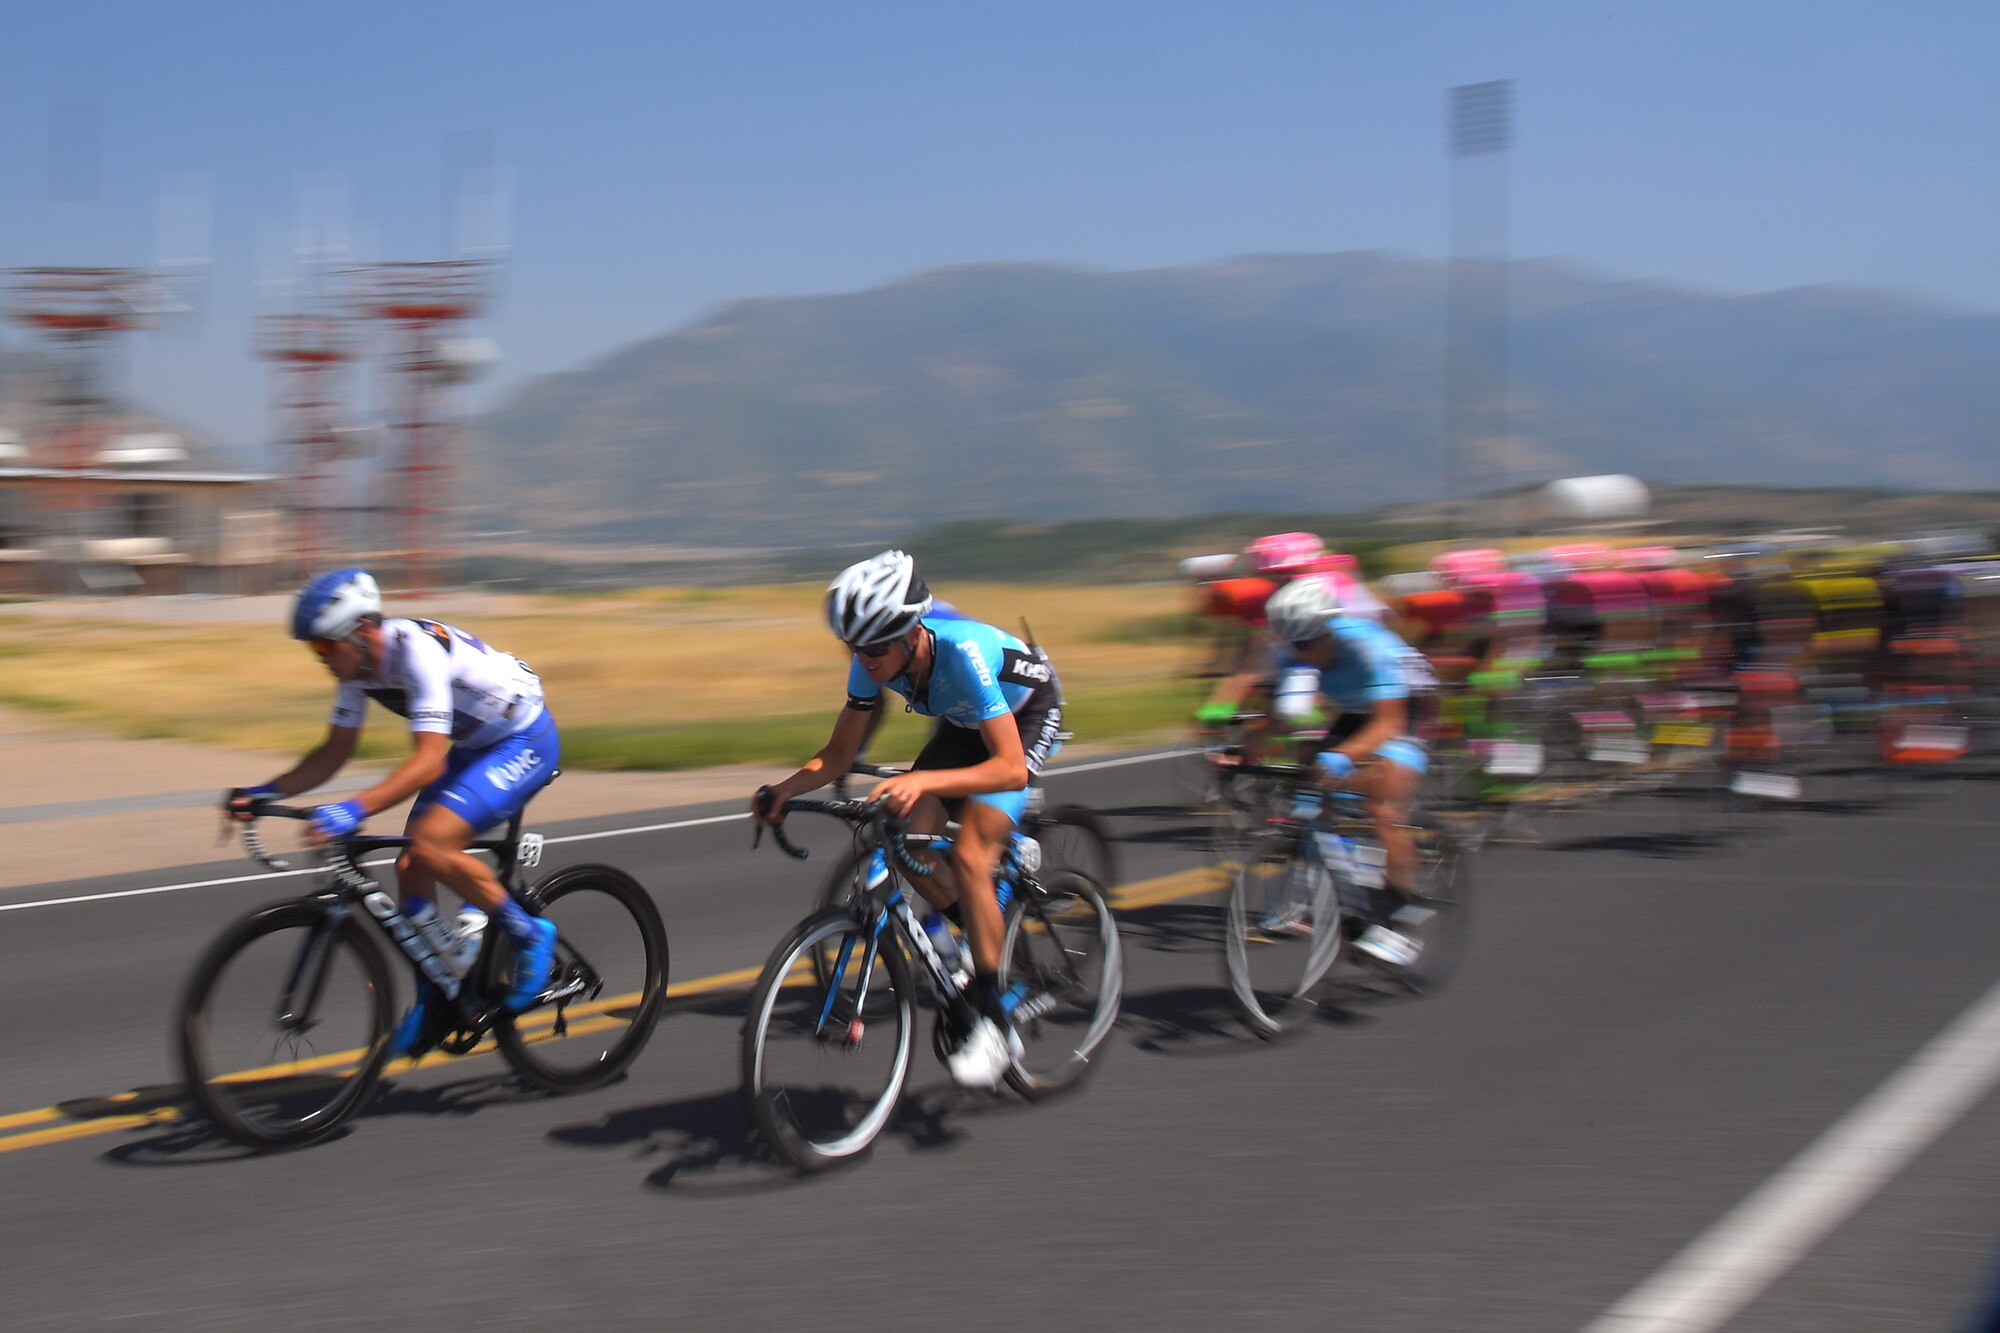 The peloton during stage 3 of the 2018 Tour of Utah road race Aug. 9, 2018, at Hill Air Force Base, Utah. The Tour of Utah is one of the top professional cycling events in the country and showcases some of the world’s best teams and cyclists. Stage 3 of the multiday race took riders on a 116-mile route from Antelope Island to Layton and included a loop through the installation. (U.S. Air Force photo by Todd Cromar)